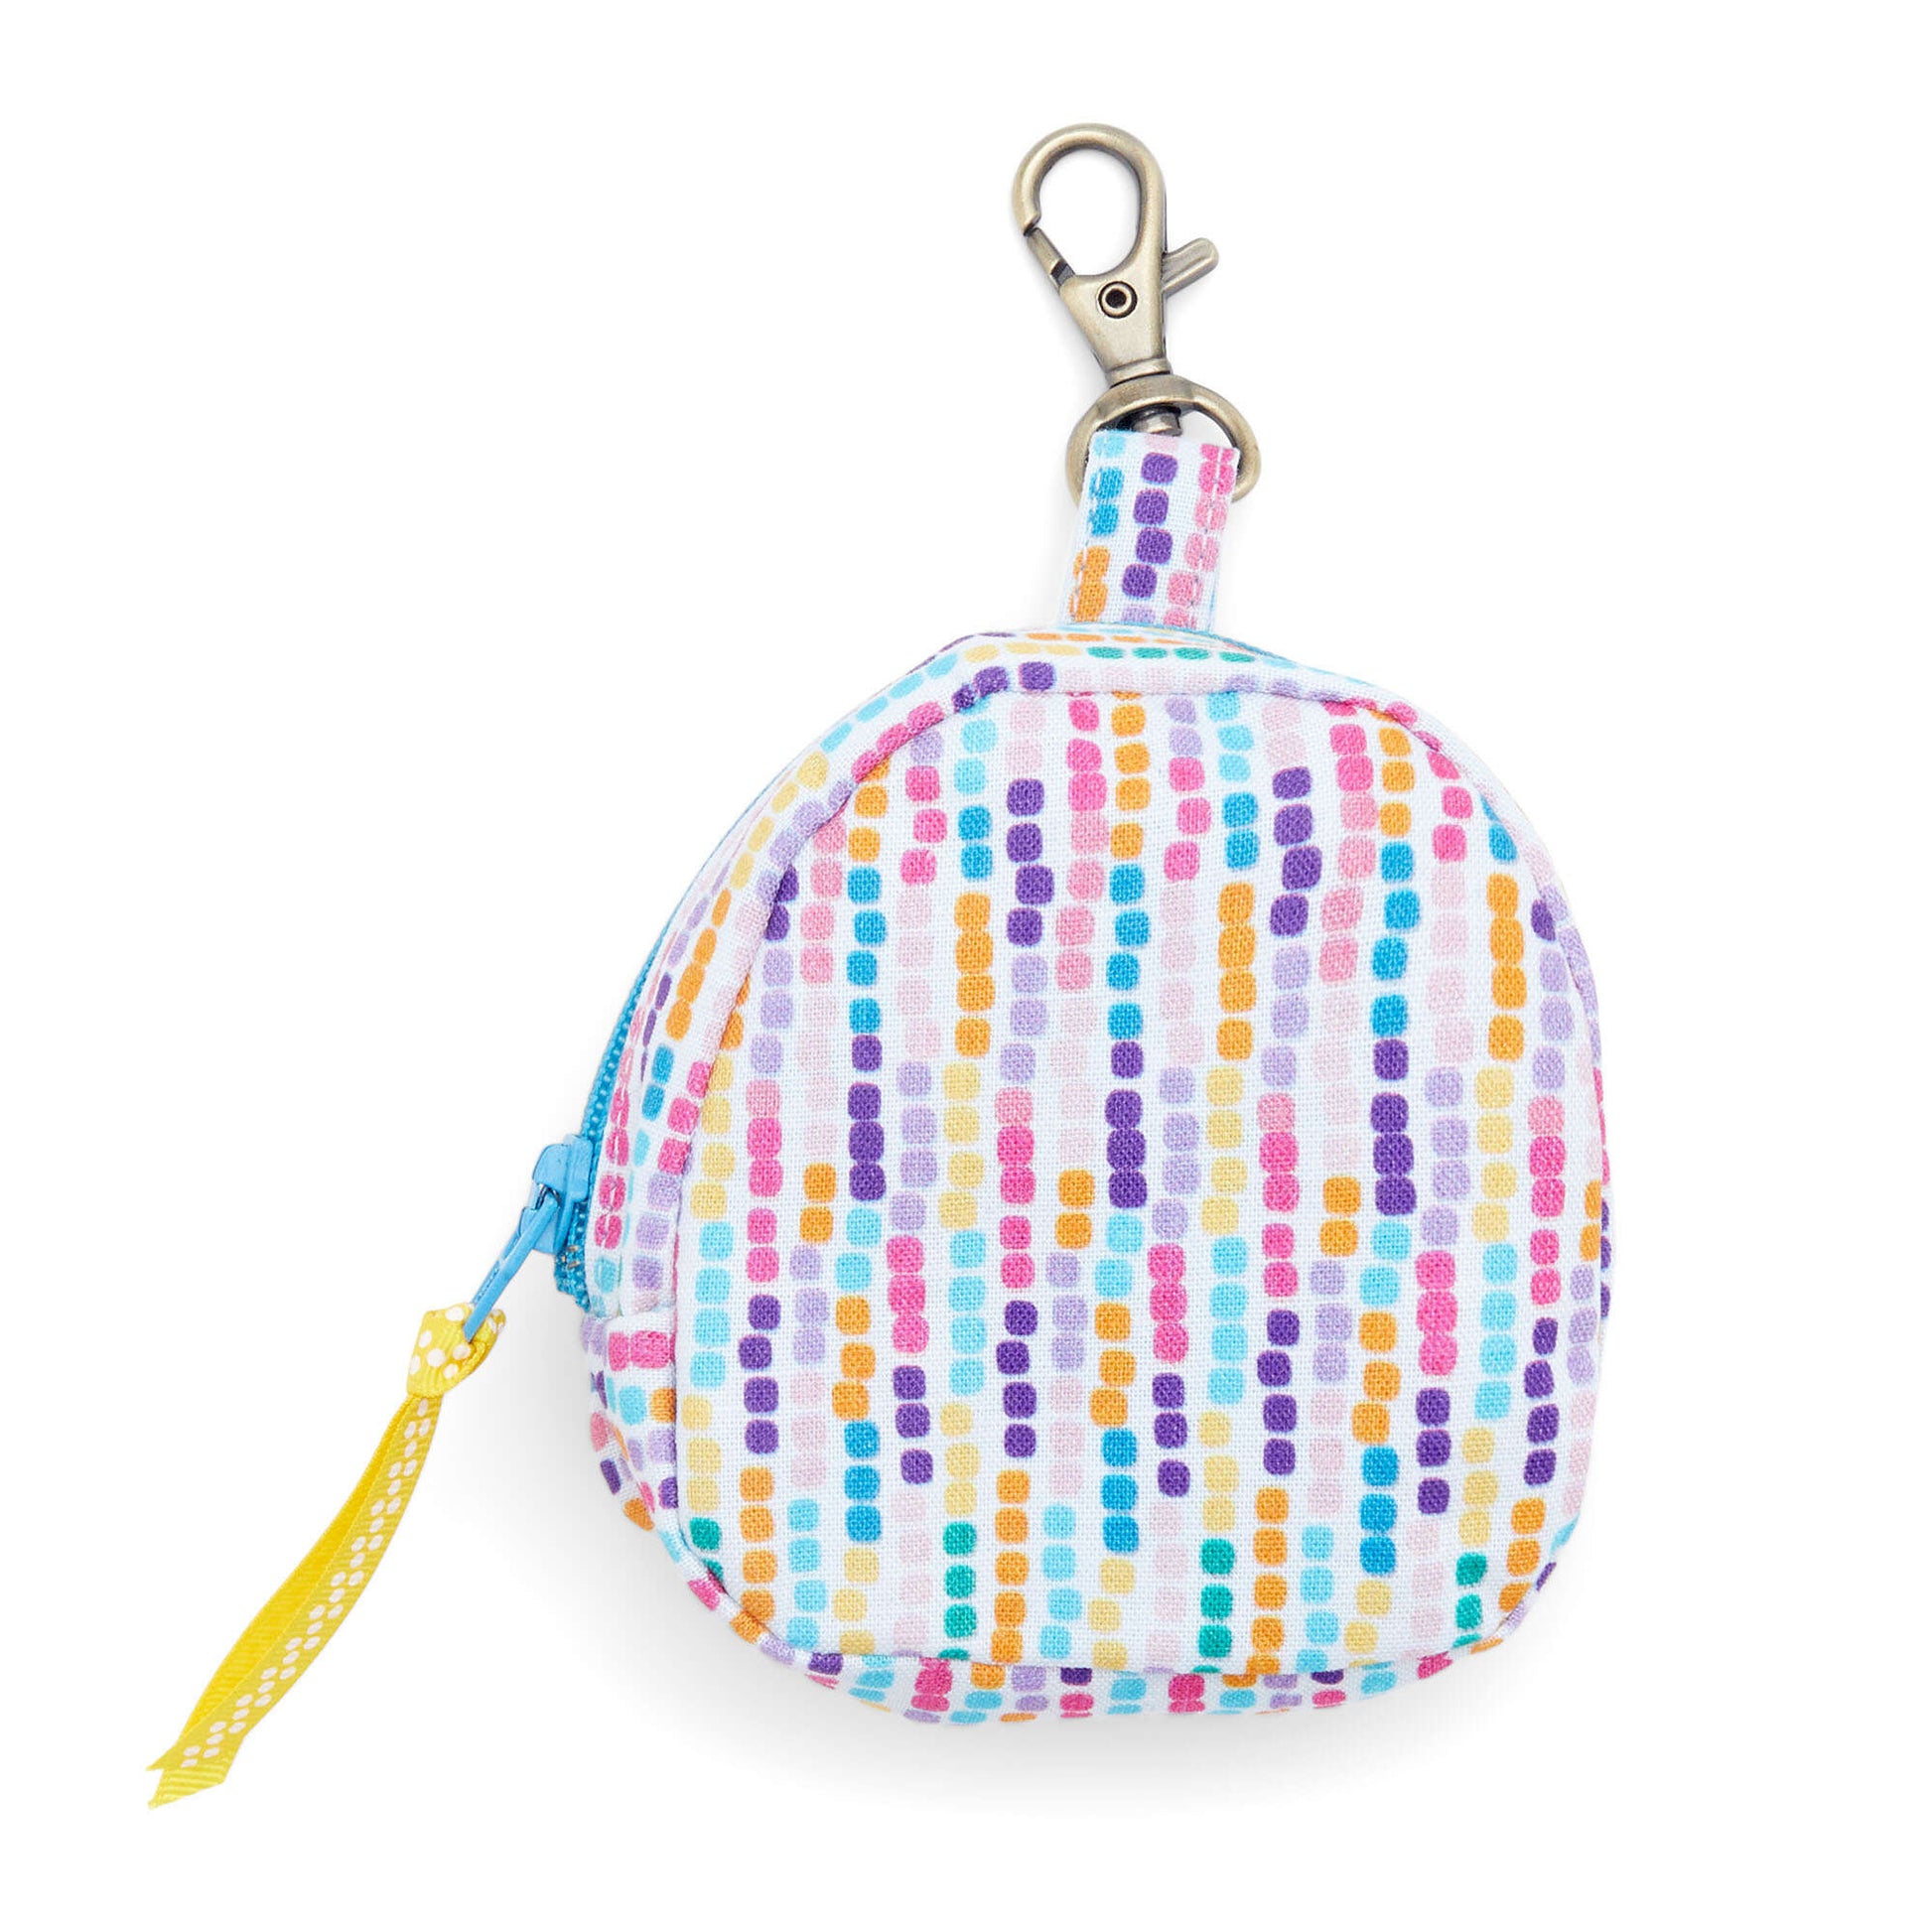 Free Coats Sewing & Clark Coin Purse Pattern